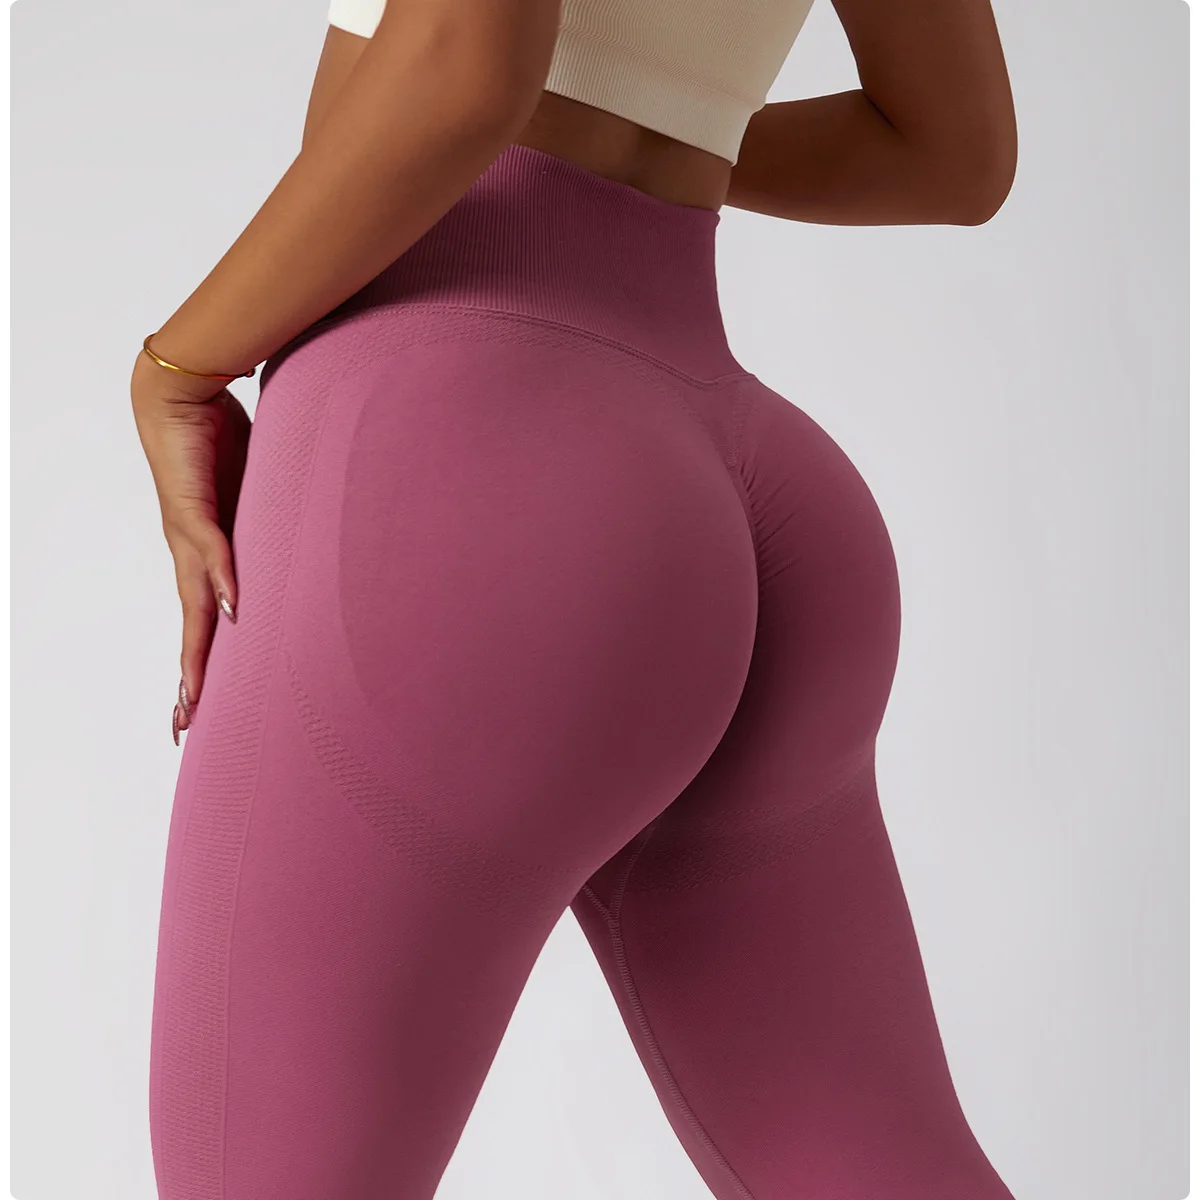 Sexy Women Tights Package Hip Yoga Sports Running Pants Leggings Plus Size